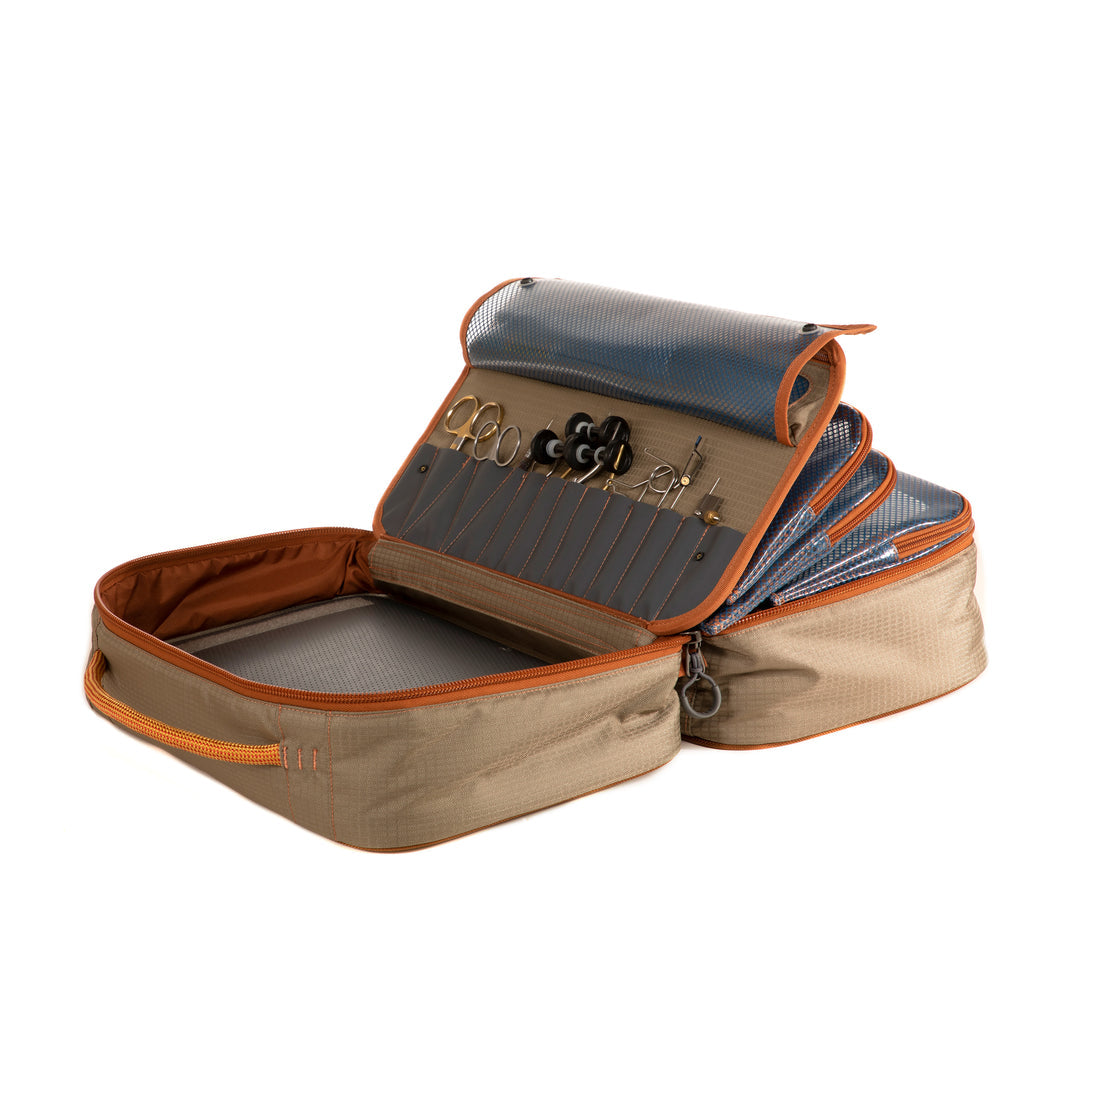 Fishpond Green River Gear Bag – Out Fly Fishing